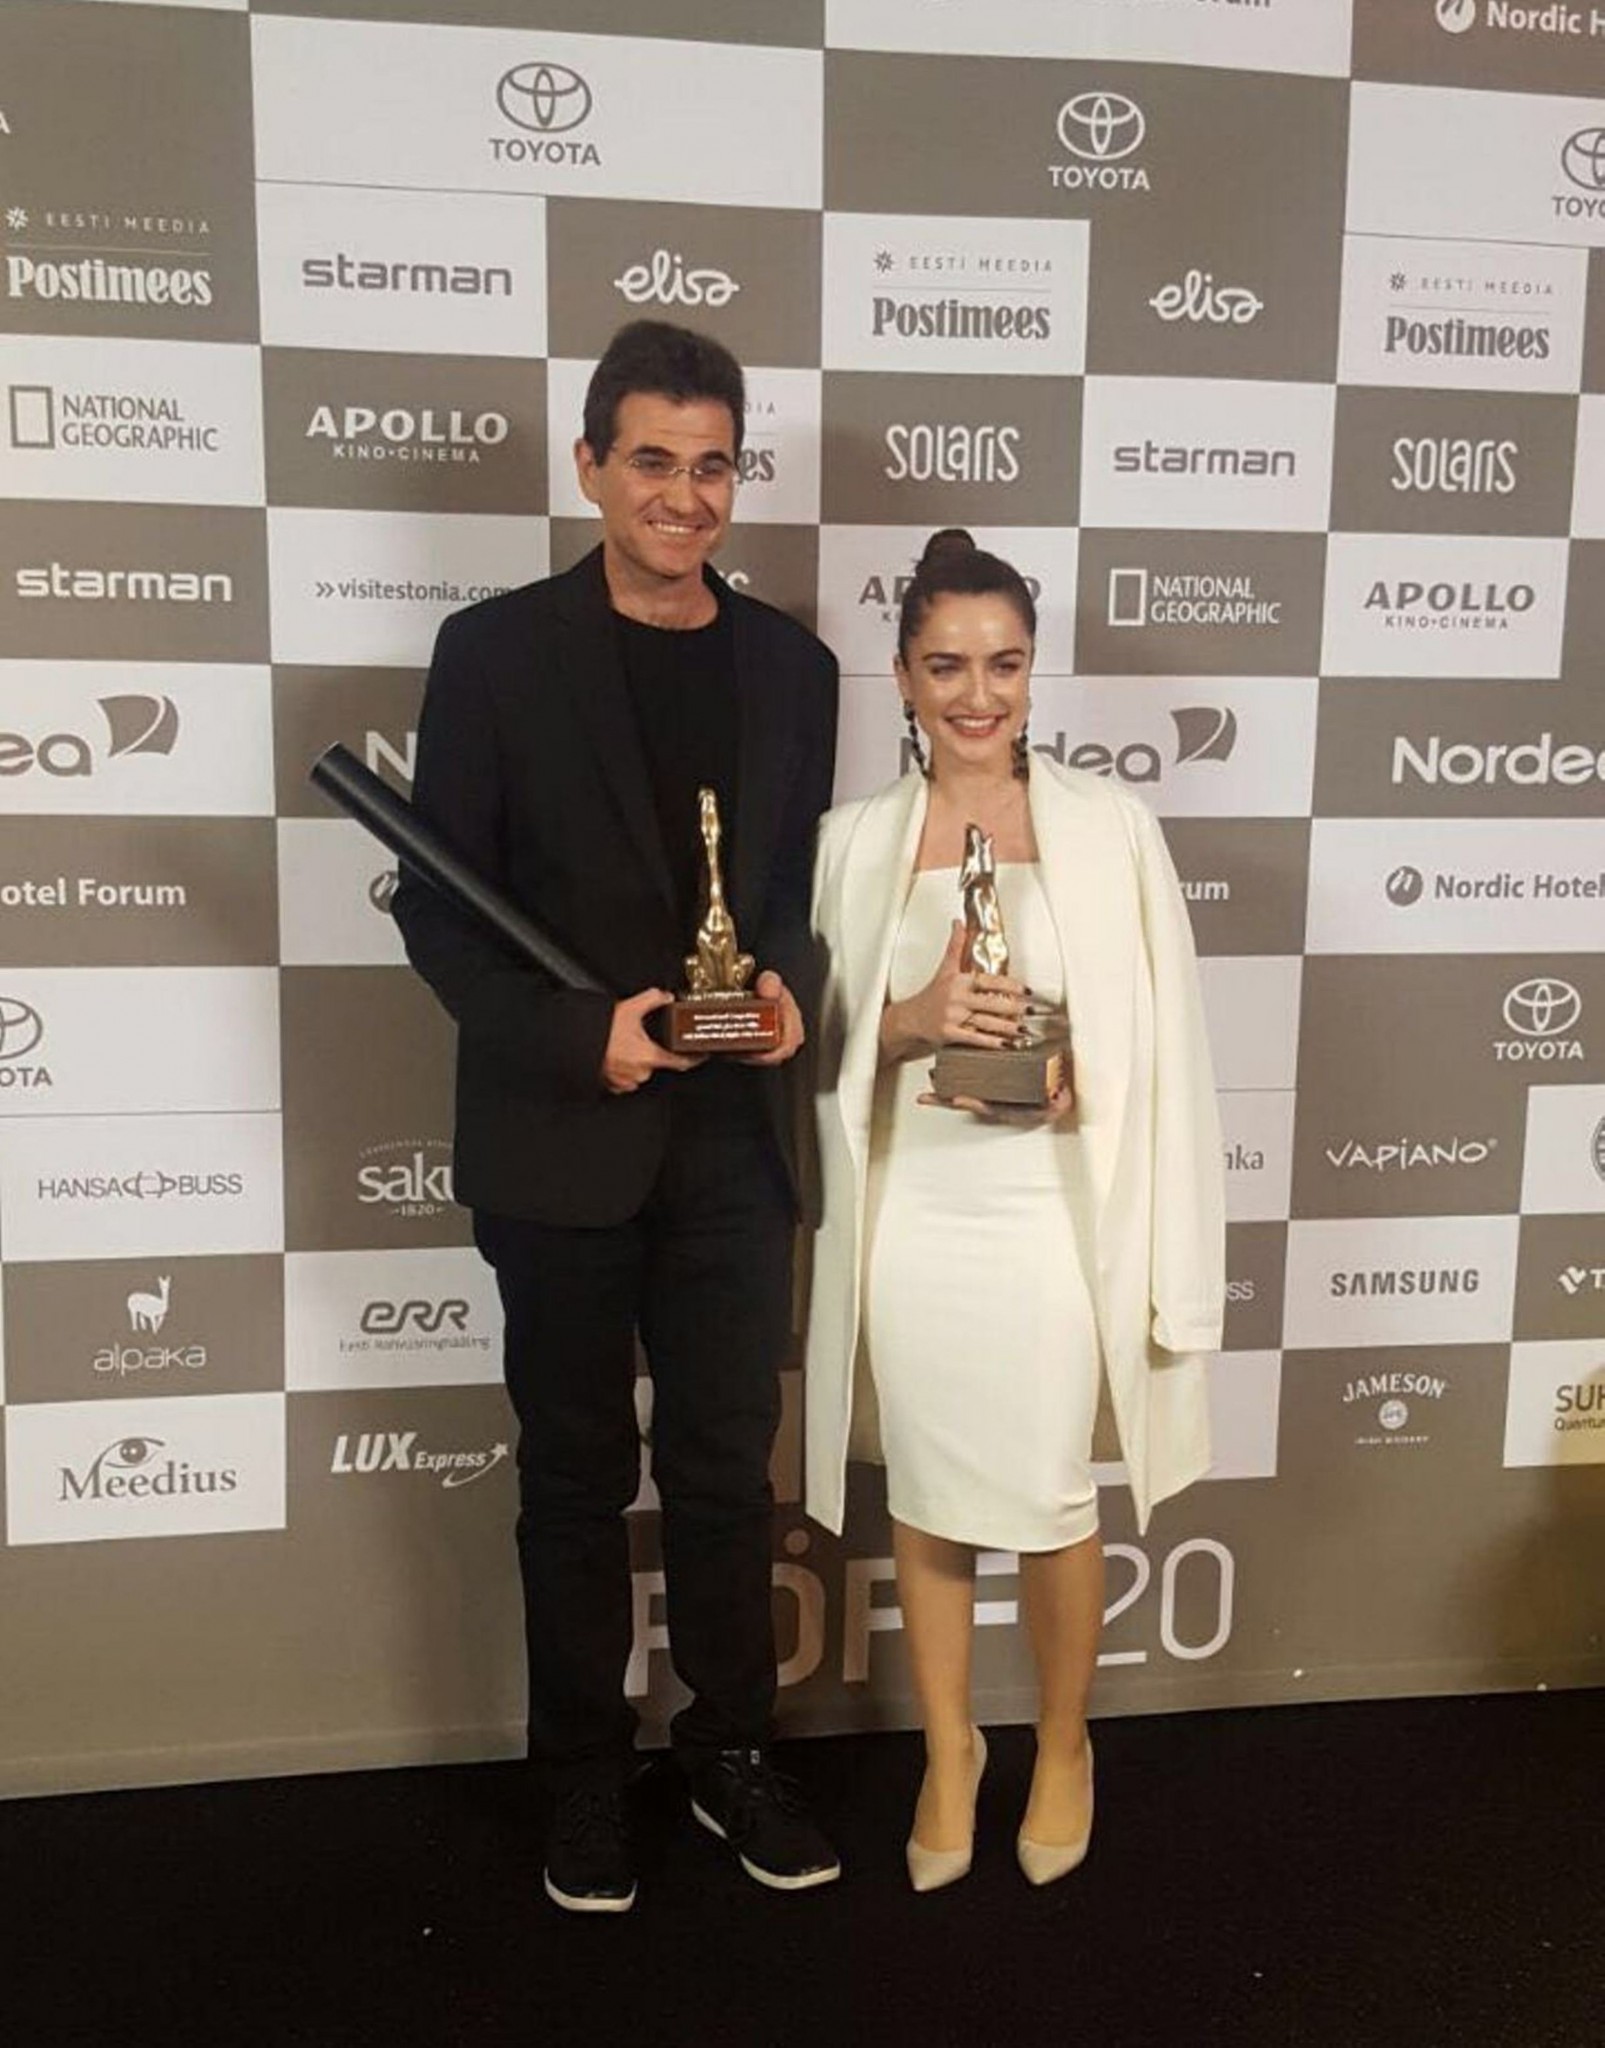 Israeli director Eitan Anner collected the Grand Prix at the 20th Tallinn Black Nights Film Festival and Ania Bukstein was awarded as the best actress. Photo courtesy